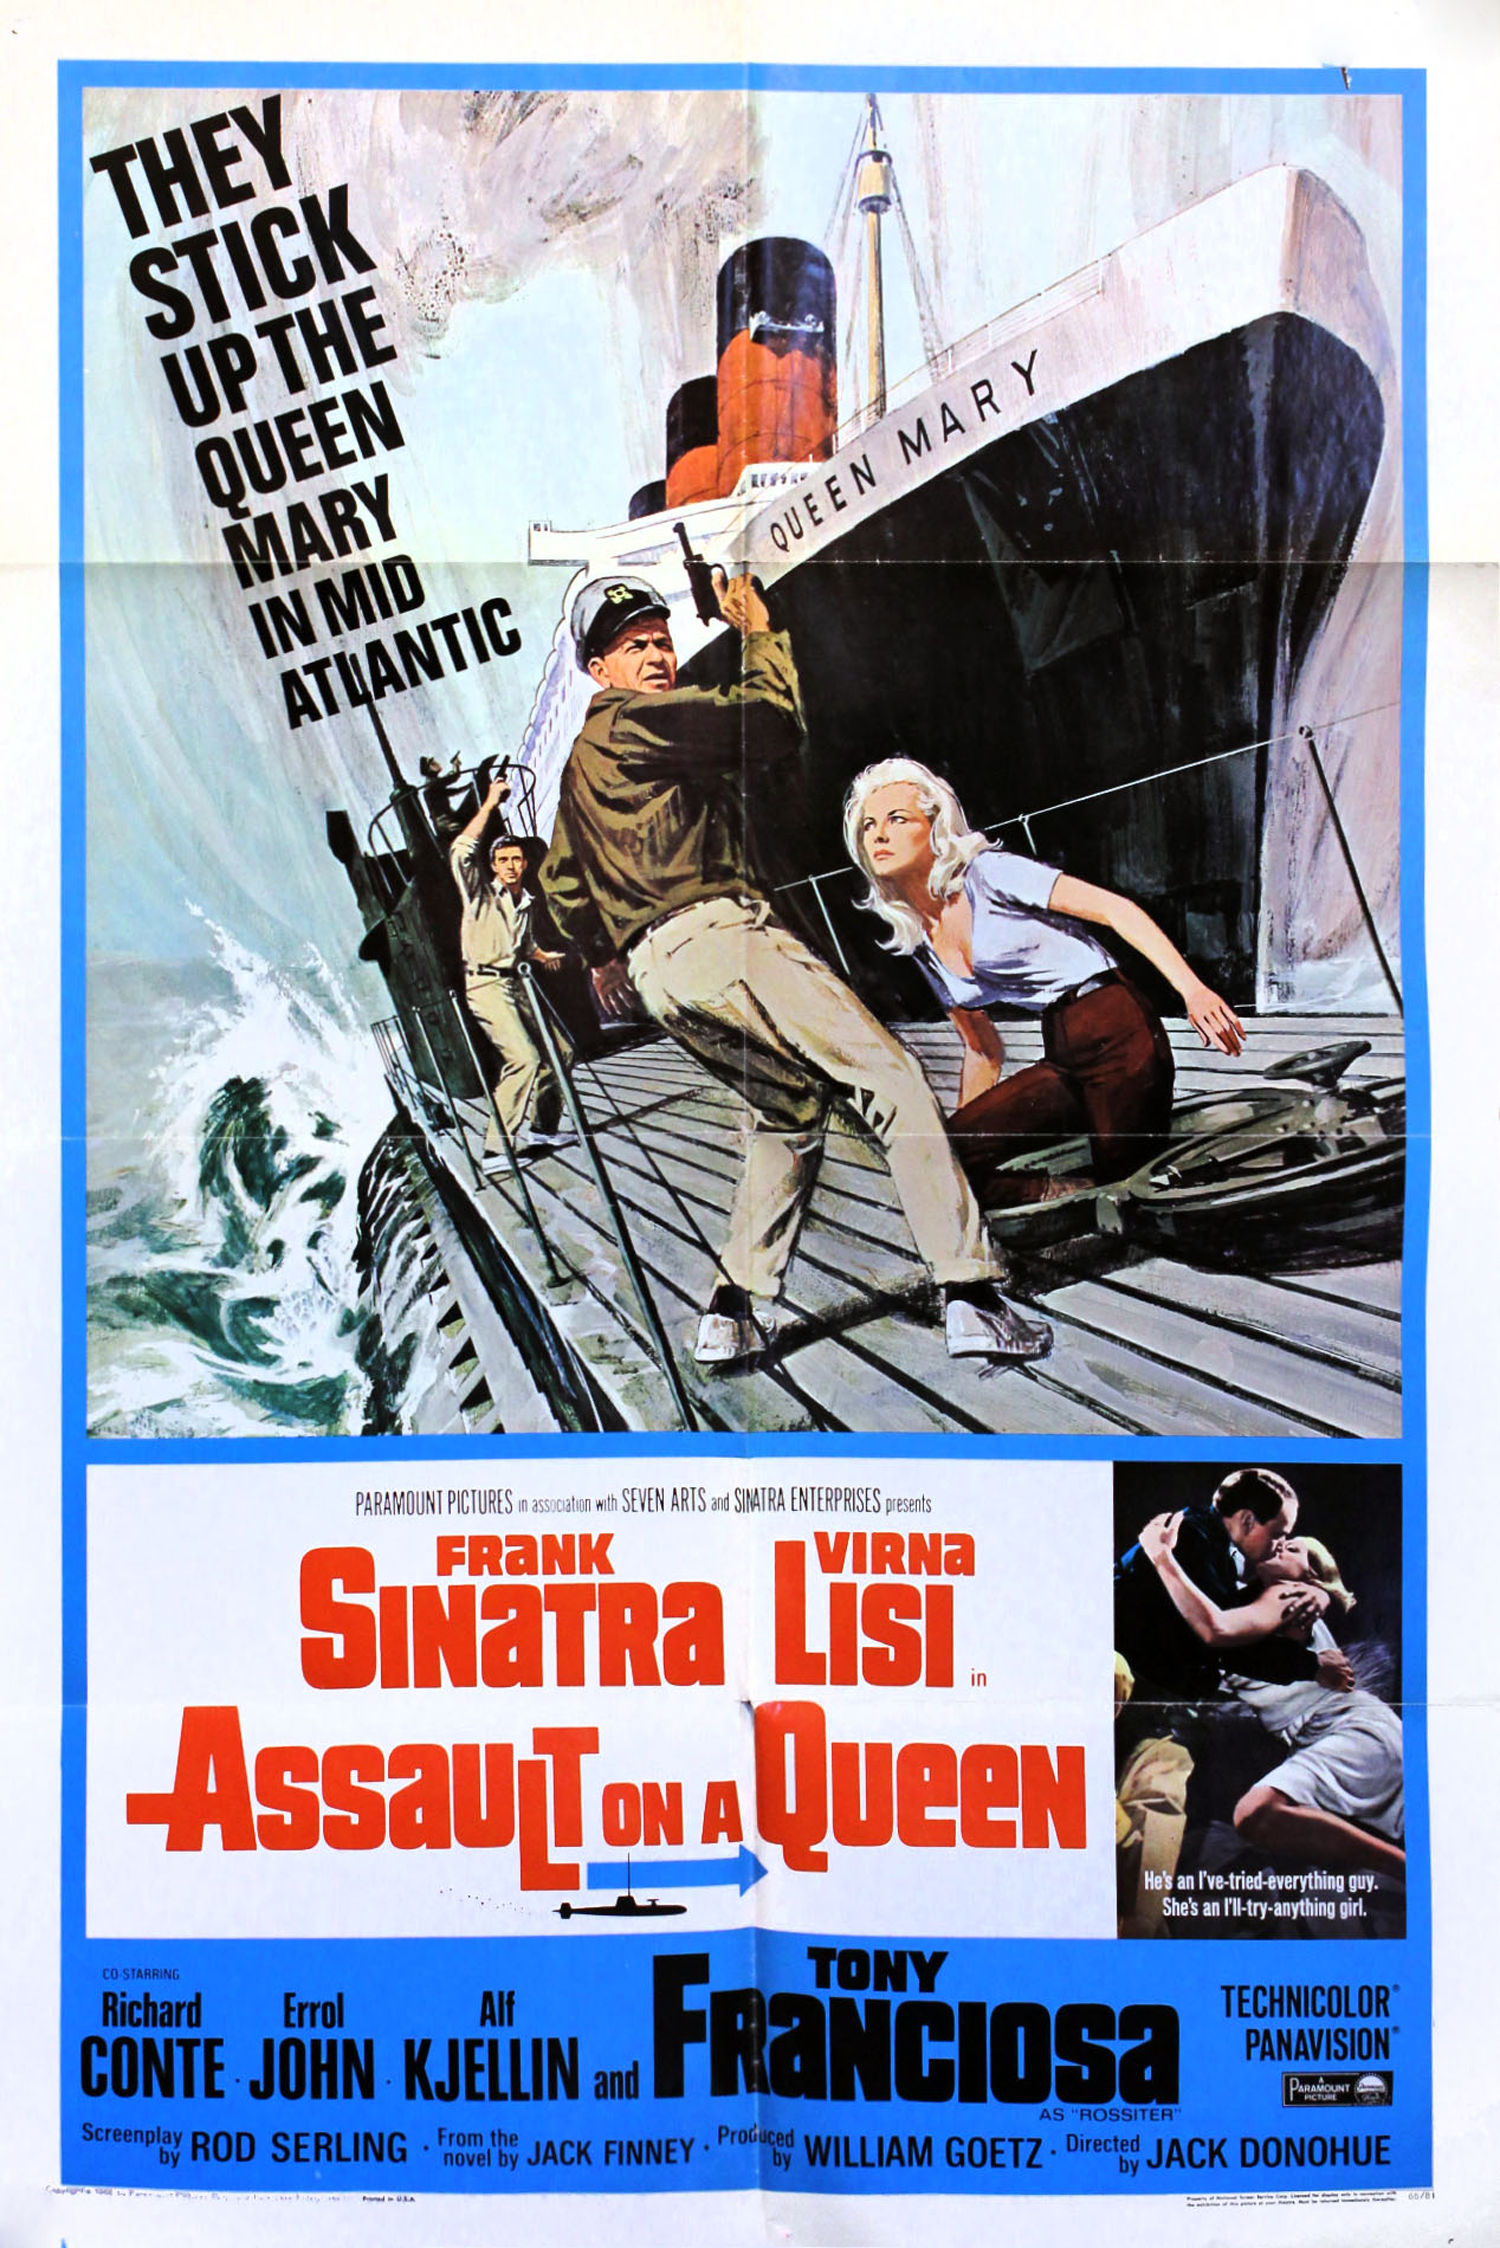  3-sheet movie poster for  Assault on a Queen  